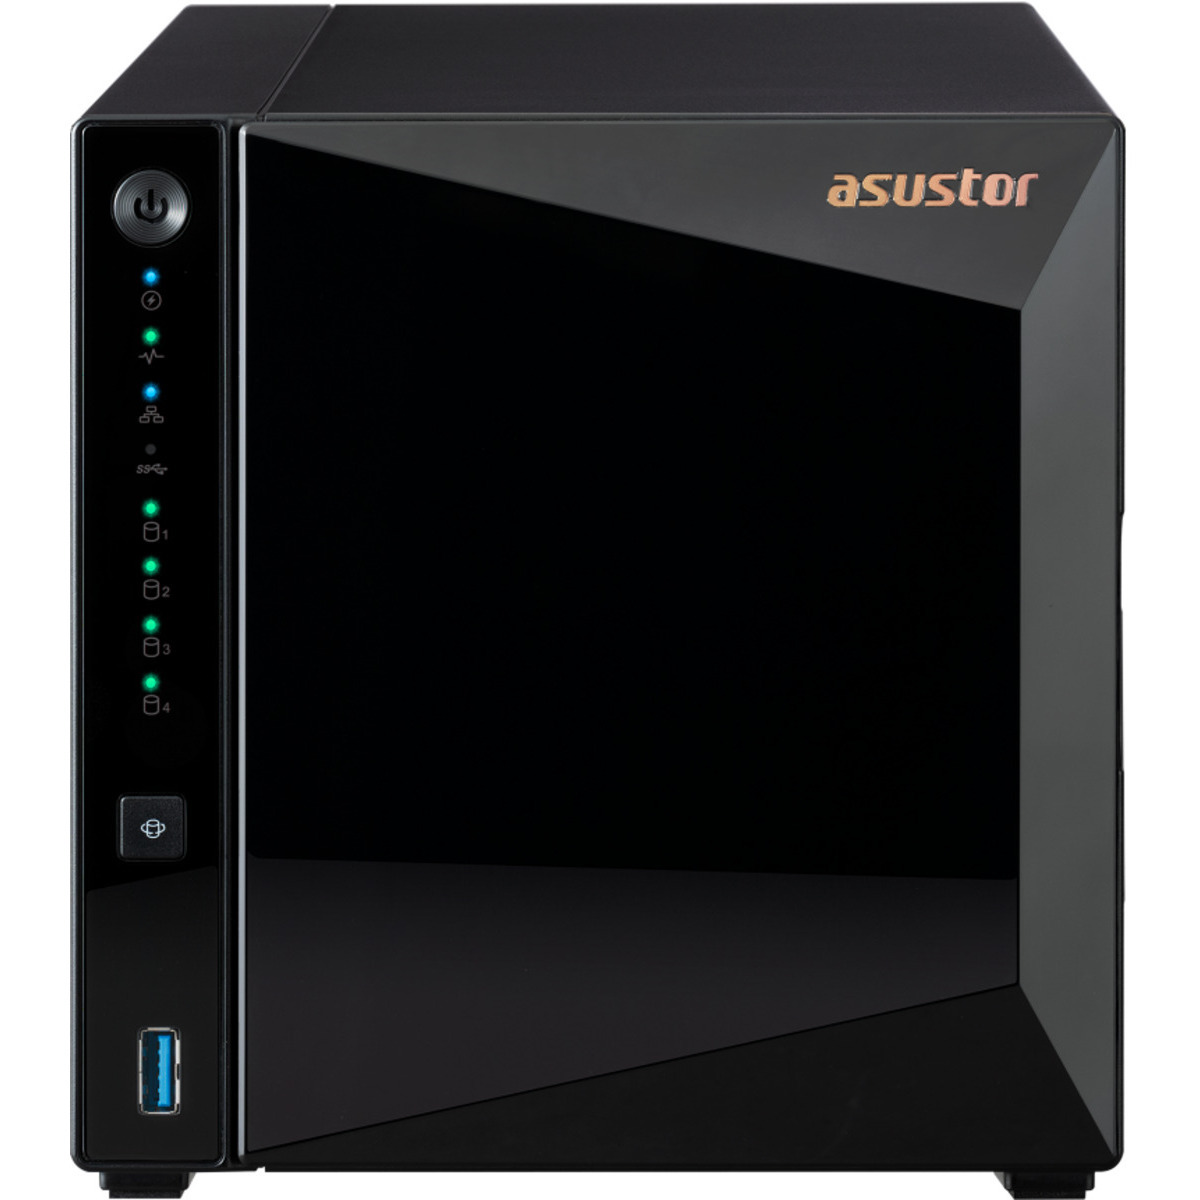 ASUSTOR DRIVESTOR 4 Pro AS3304T 32tb 4-Bay Desktop Personal / Basic Home / Small Office NAS - Network Attached Storage Device 4x8tb Samsung 870 QVO MZ-77Q8T0 2.5 560/530MB/s SATA 6Gb/s SSD CONSUMER Class Drives Installed - Burn-In Tested DRIVESTOR 4 Pro AS3304T